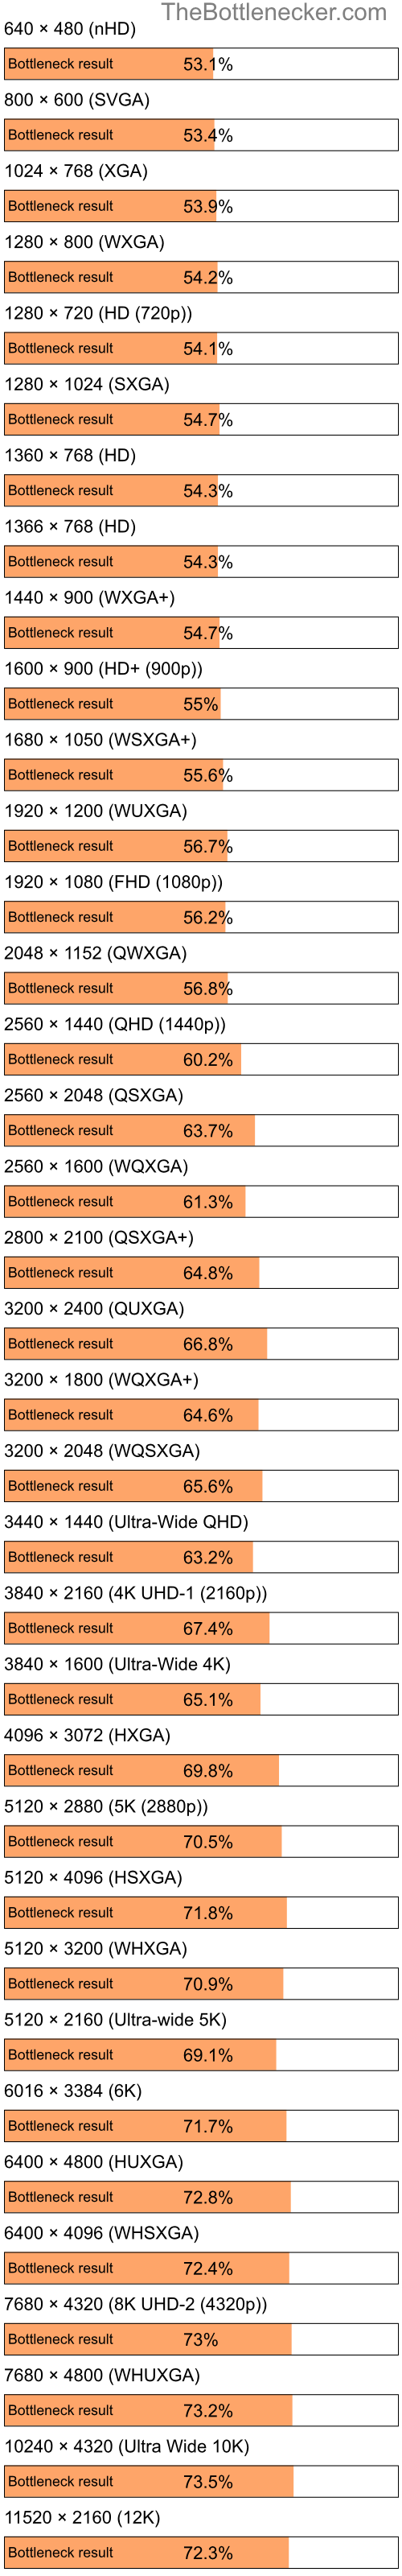 Bottleneck results by resolution for Intel Pentium 4 and AMD Radeon X1950 GT in Processor Intense Tasks